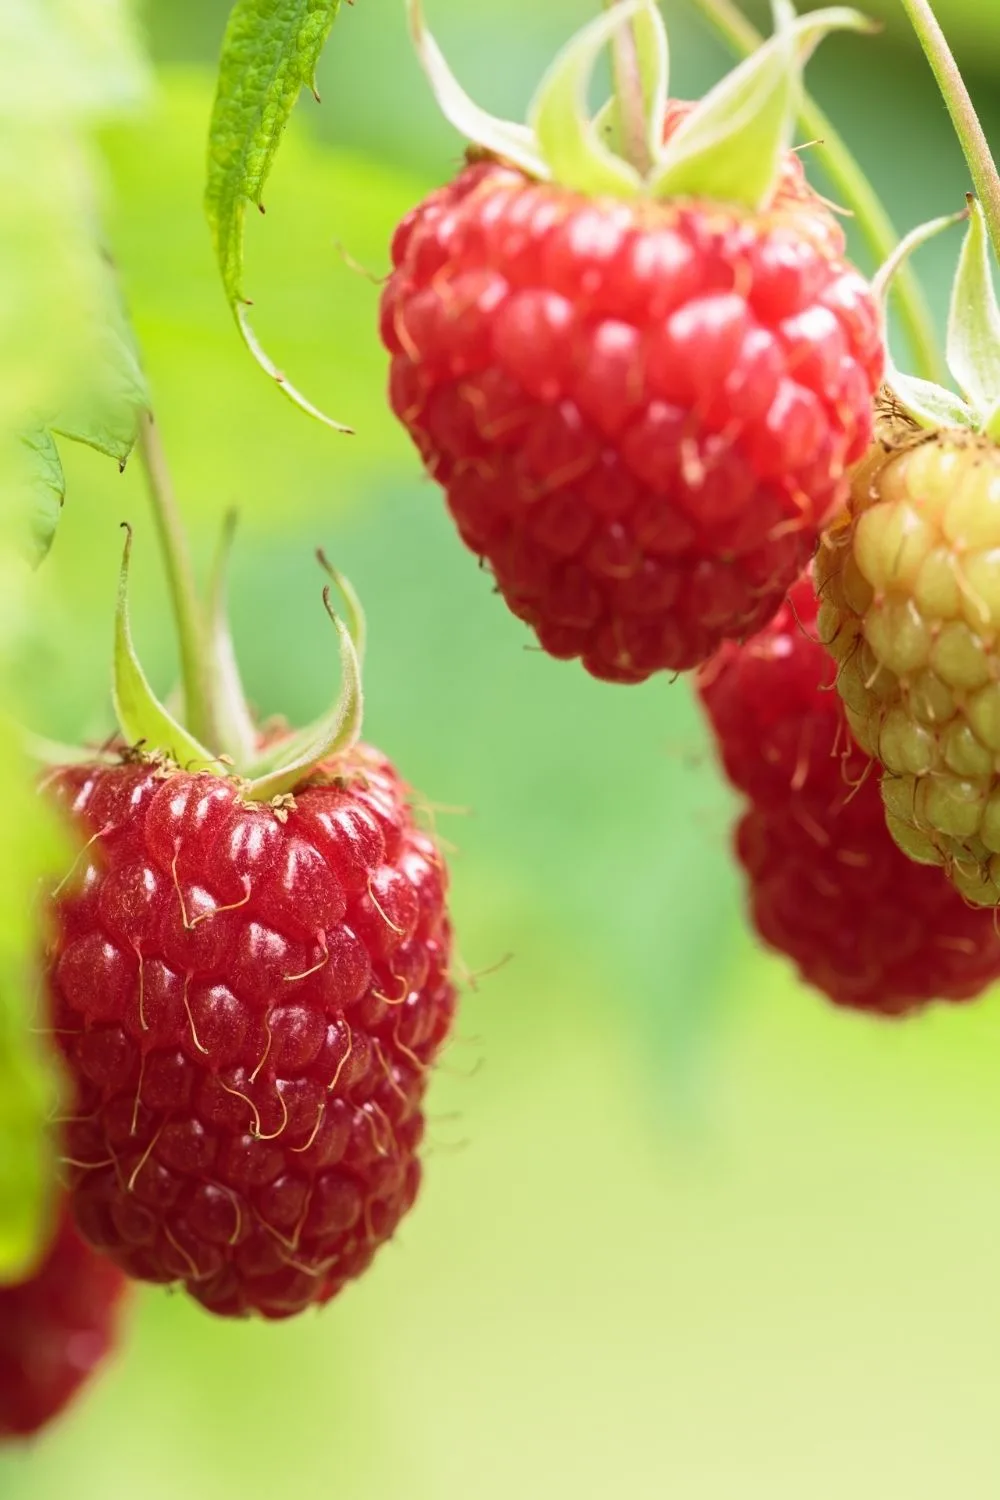 Provide sufficient sunlight for your raspberries to grow beautifully